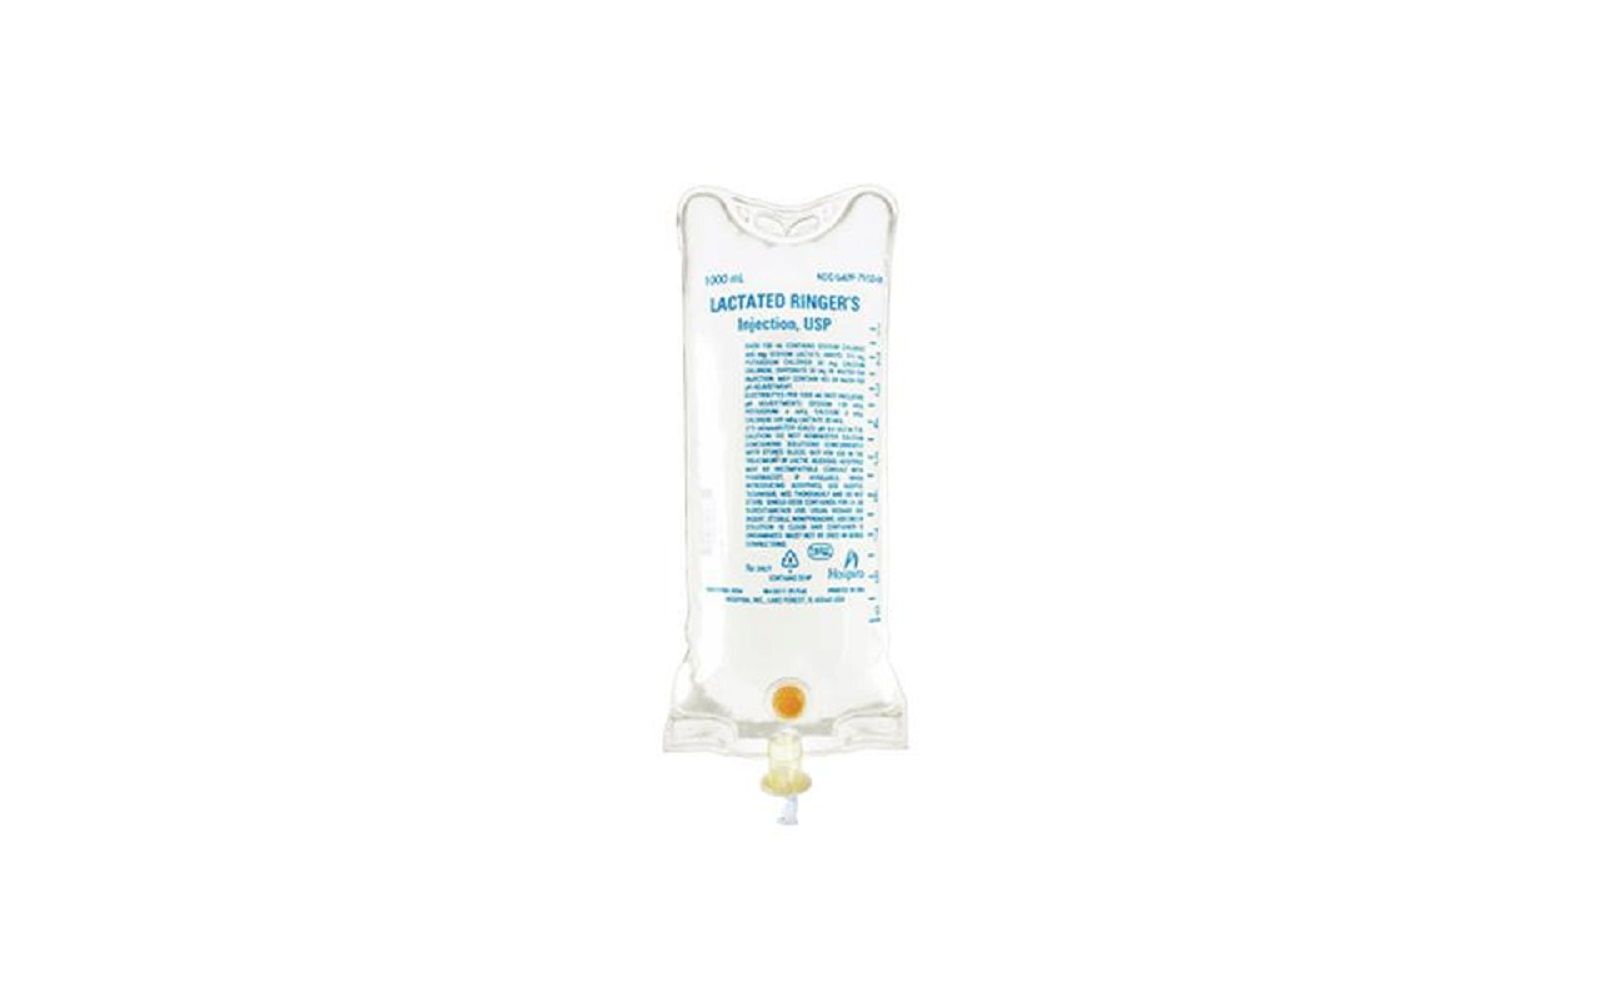 Lactated ringer’s injection, usp, flexible container - icu medical inc